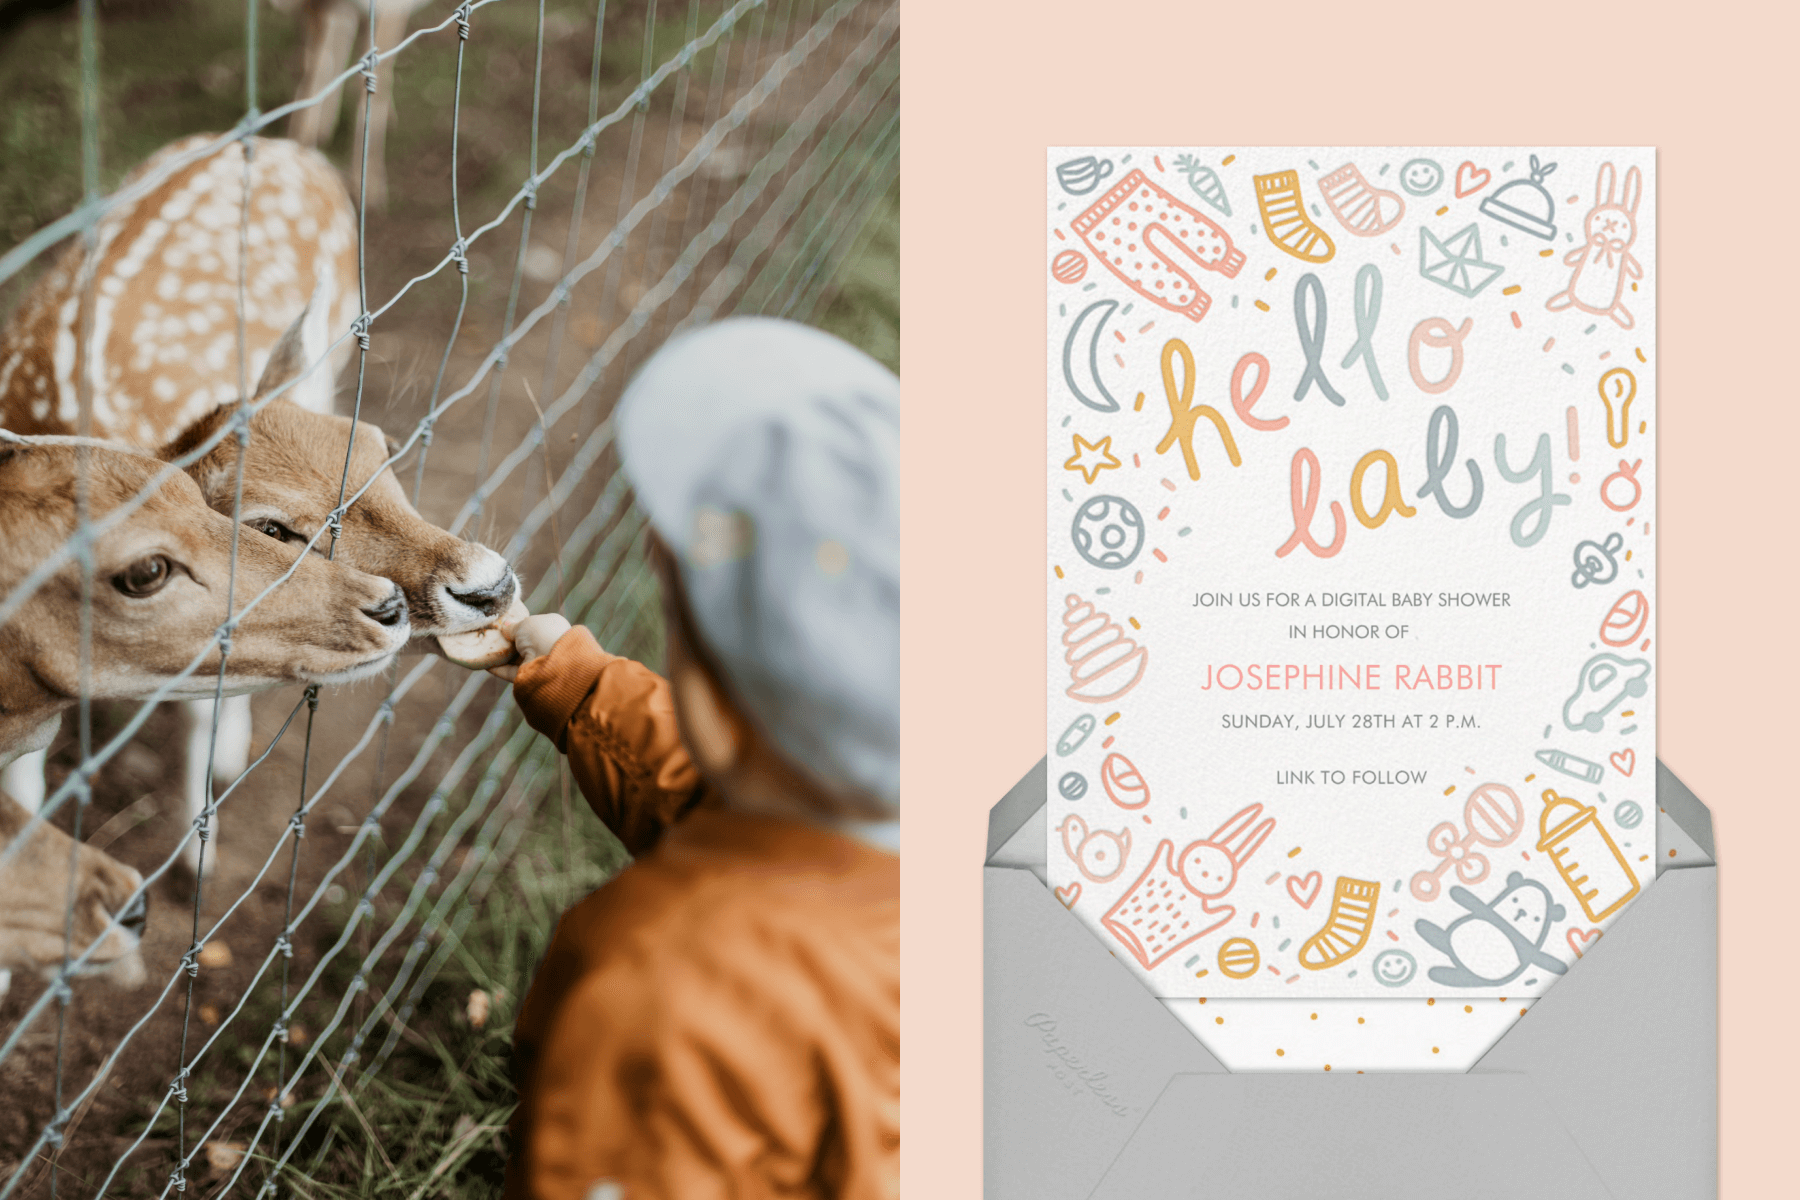 left: A child feeds deer through a fence. Right: A baby shower invitation with pastel doodles of baby accessories.